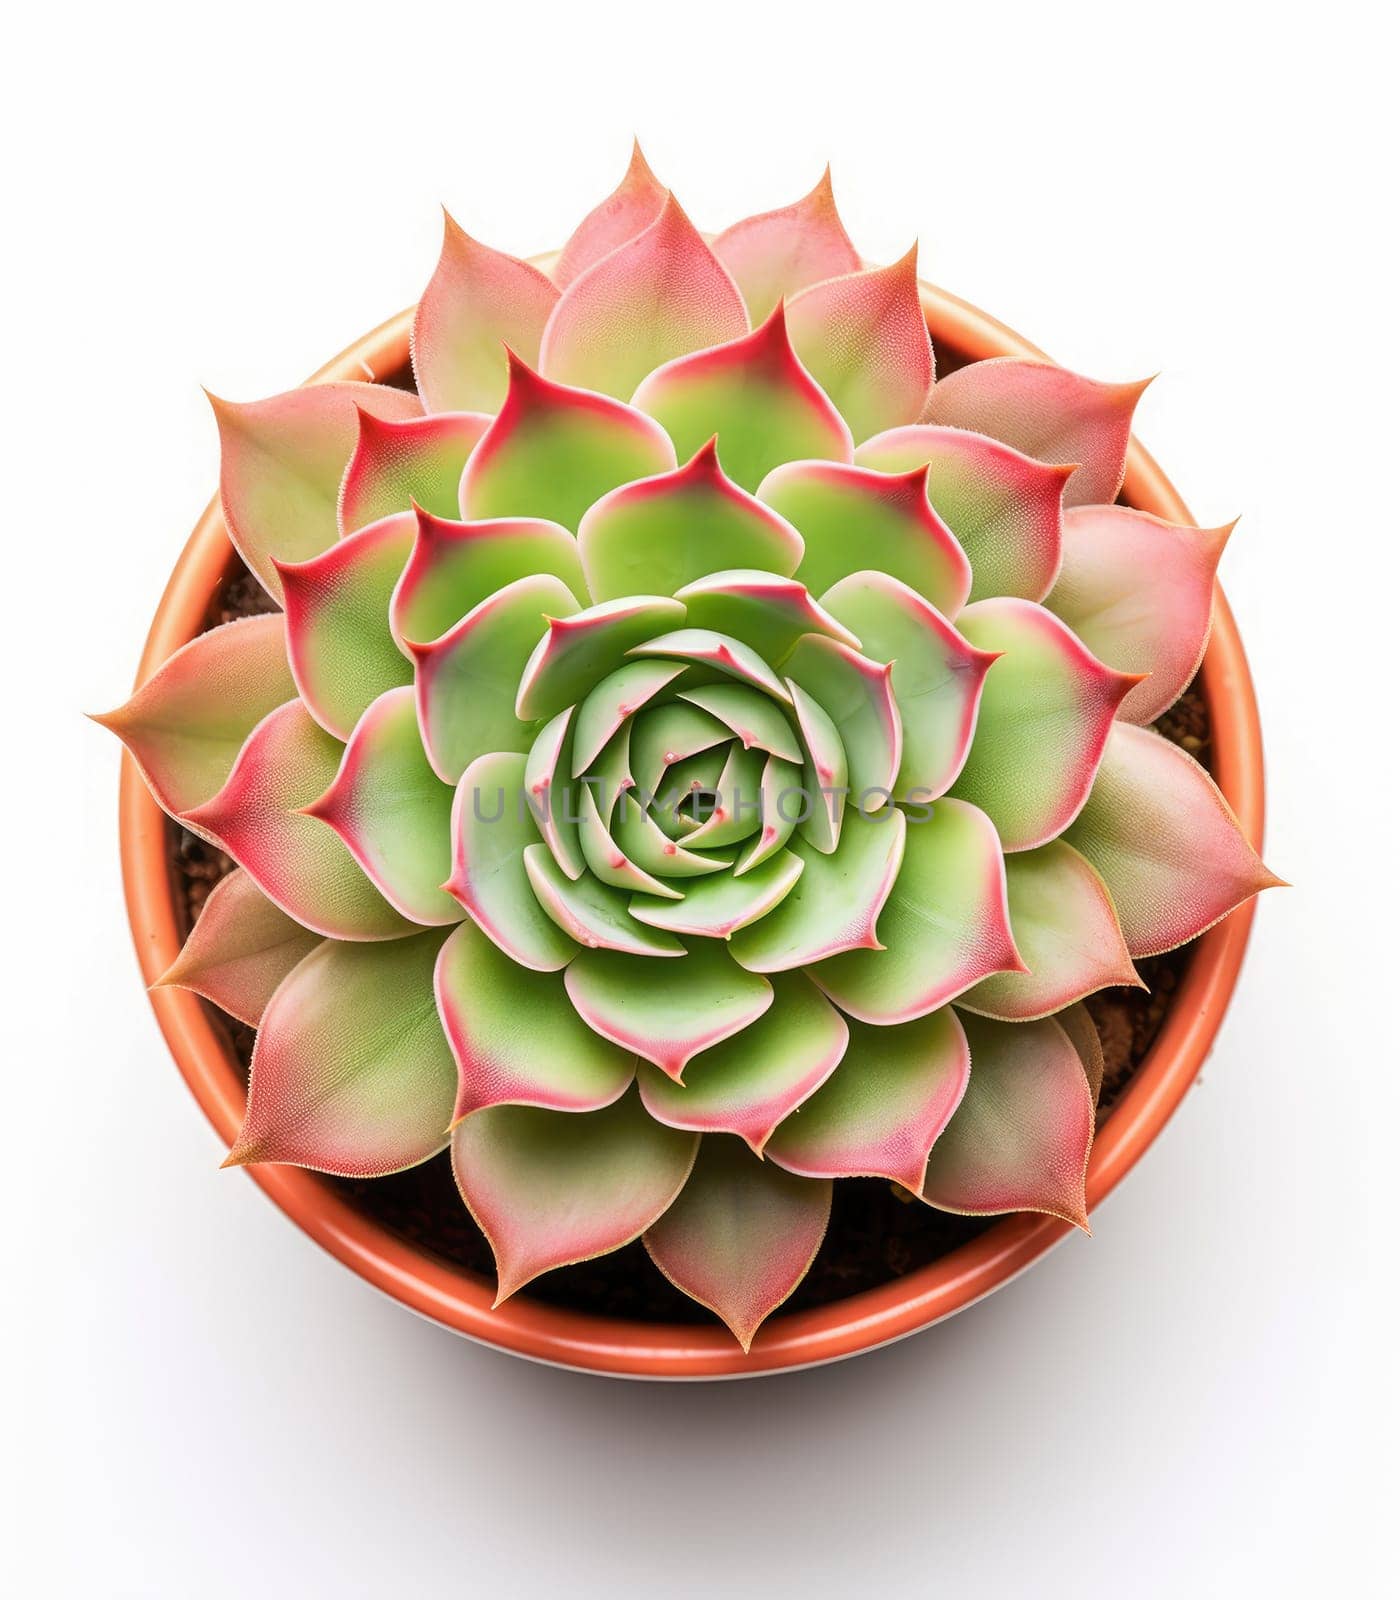 Juicy Echeveria Agawood pot plant isolated on white background, in ceramic pot. by Ramanouskaya